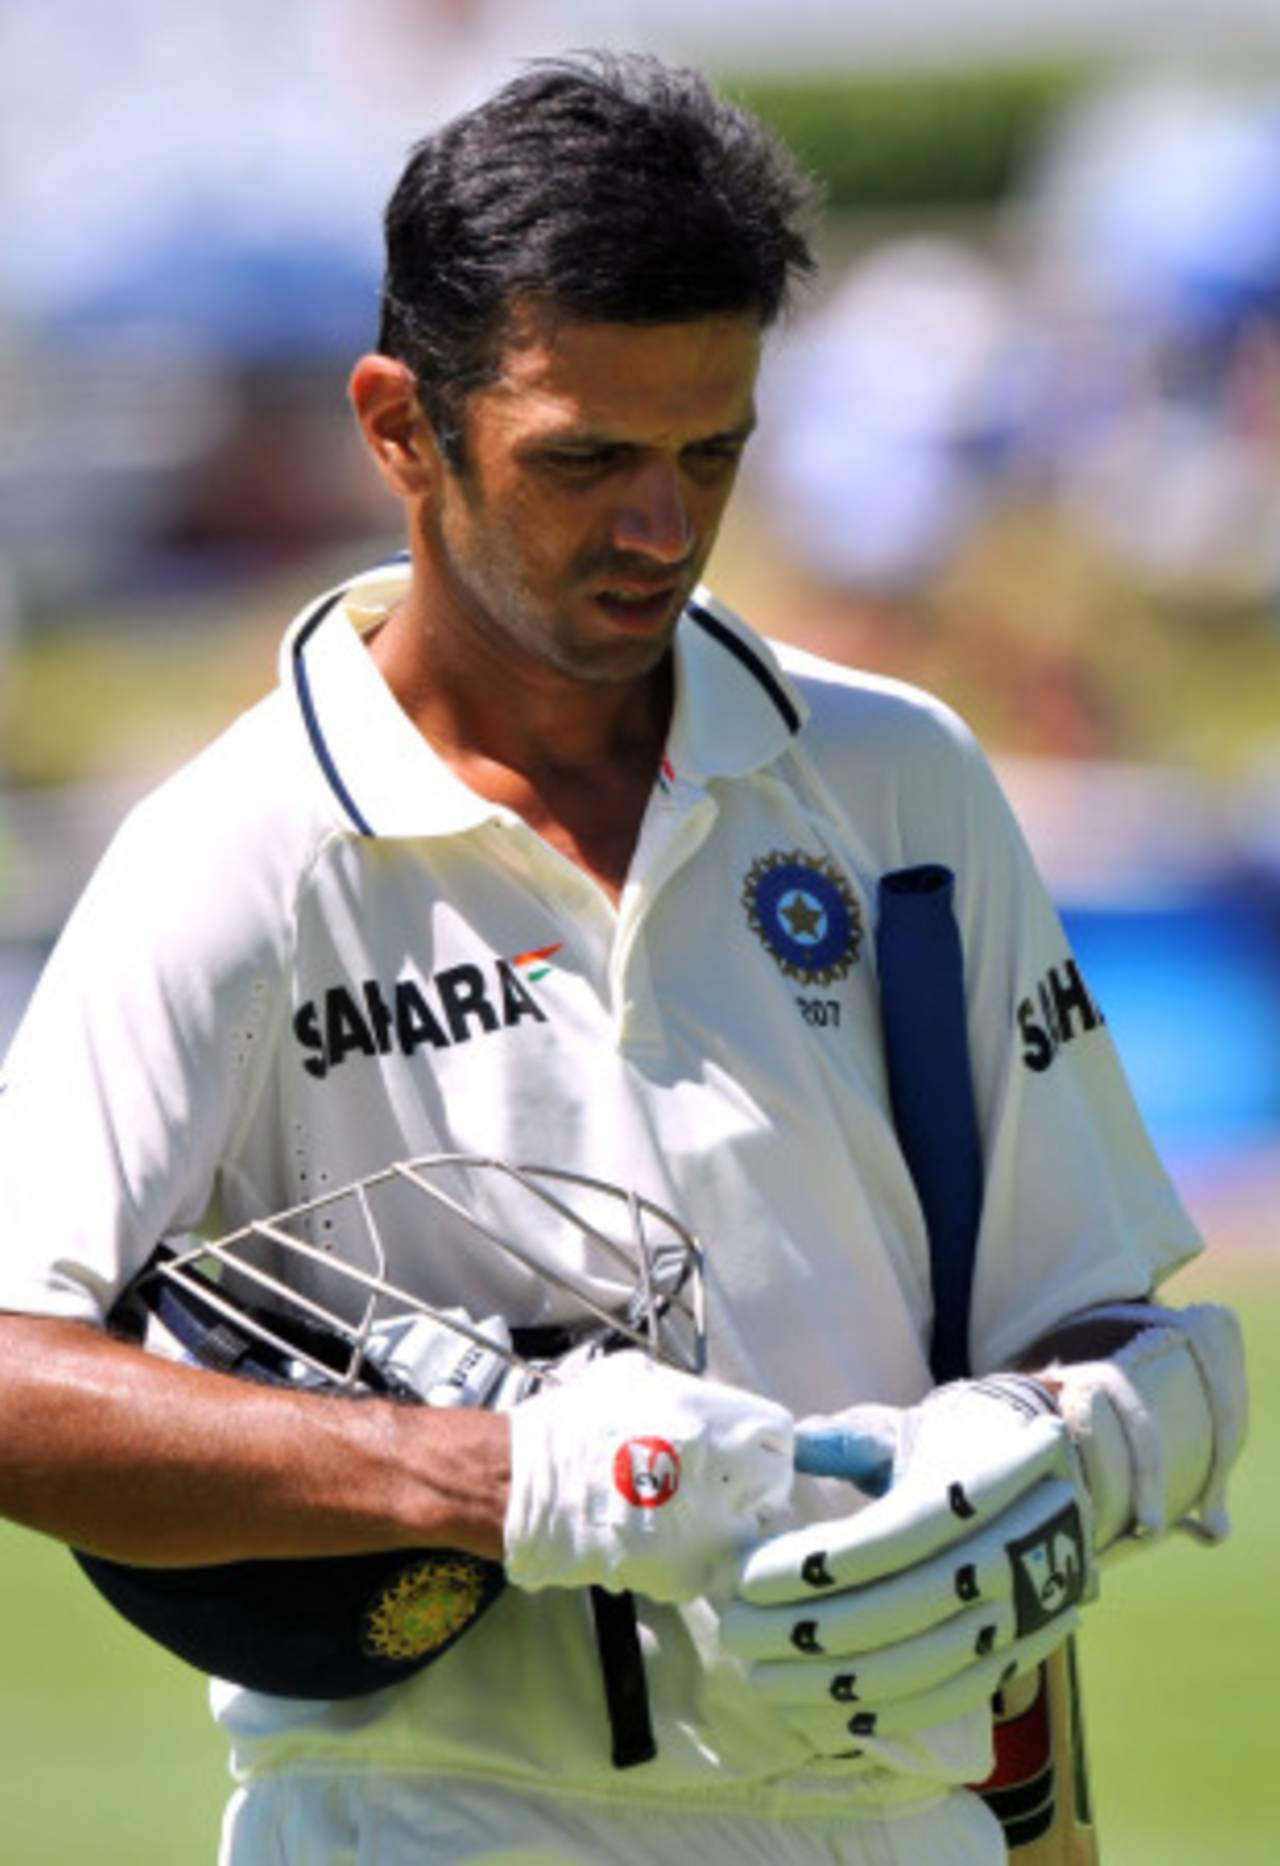 Rahul Dravid walks off after a hard-fought 31, South Africa v India, 3rd Test, Cape Town, 5th day, January 6, 2011